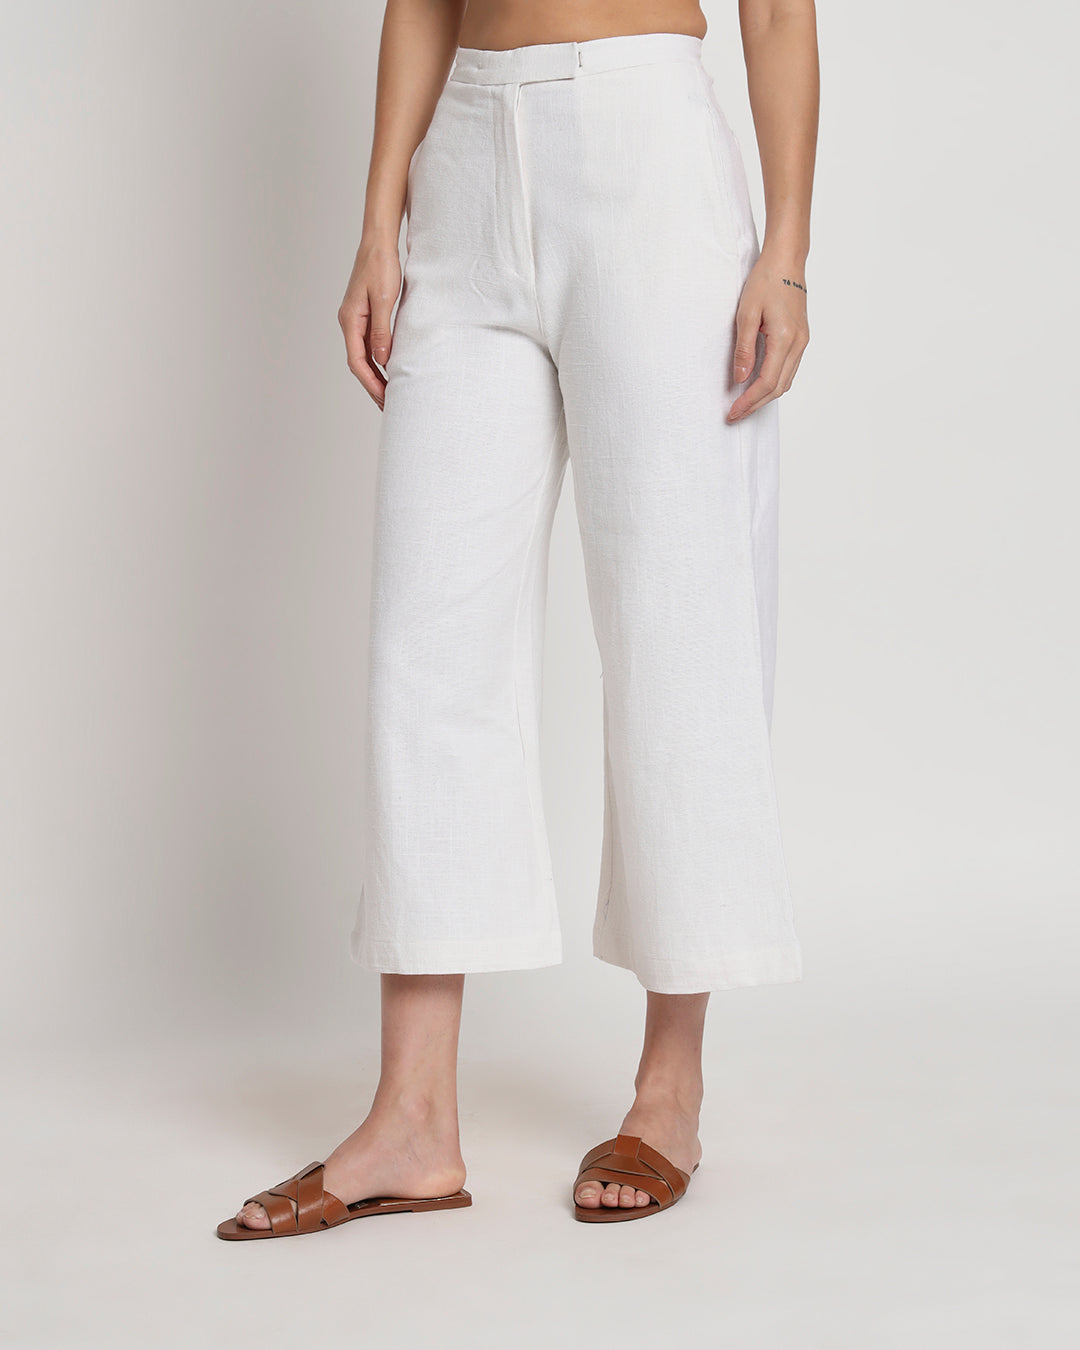 City Style White High-Waist Trousers